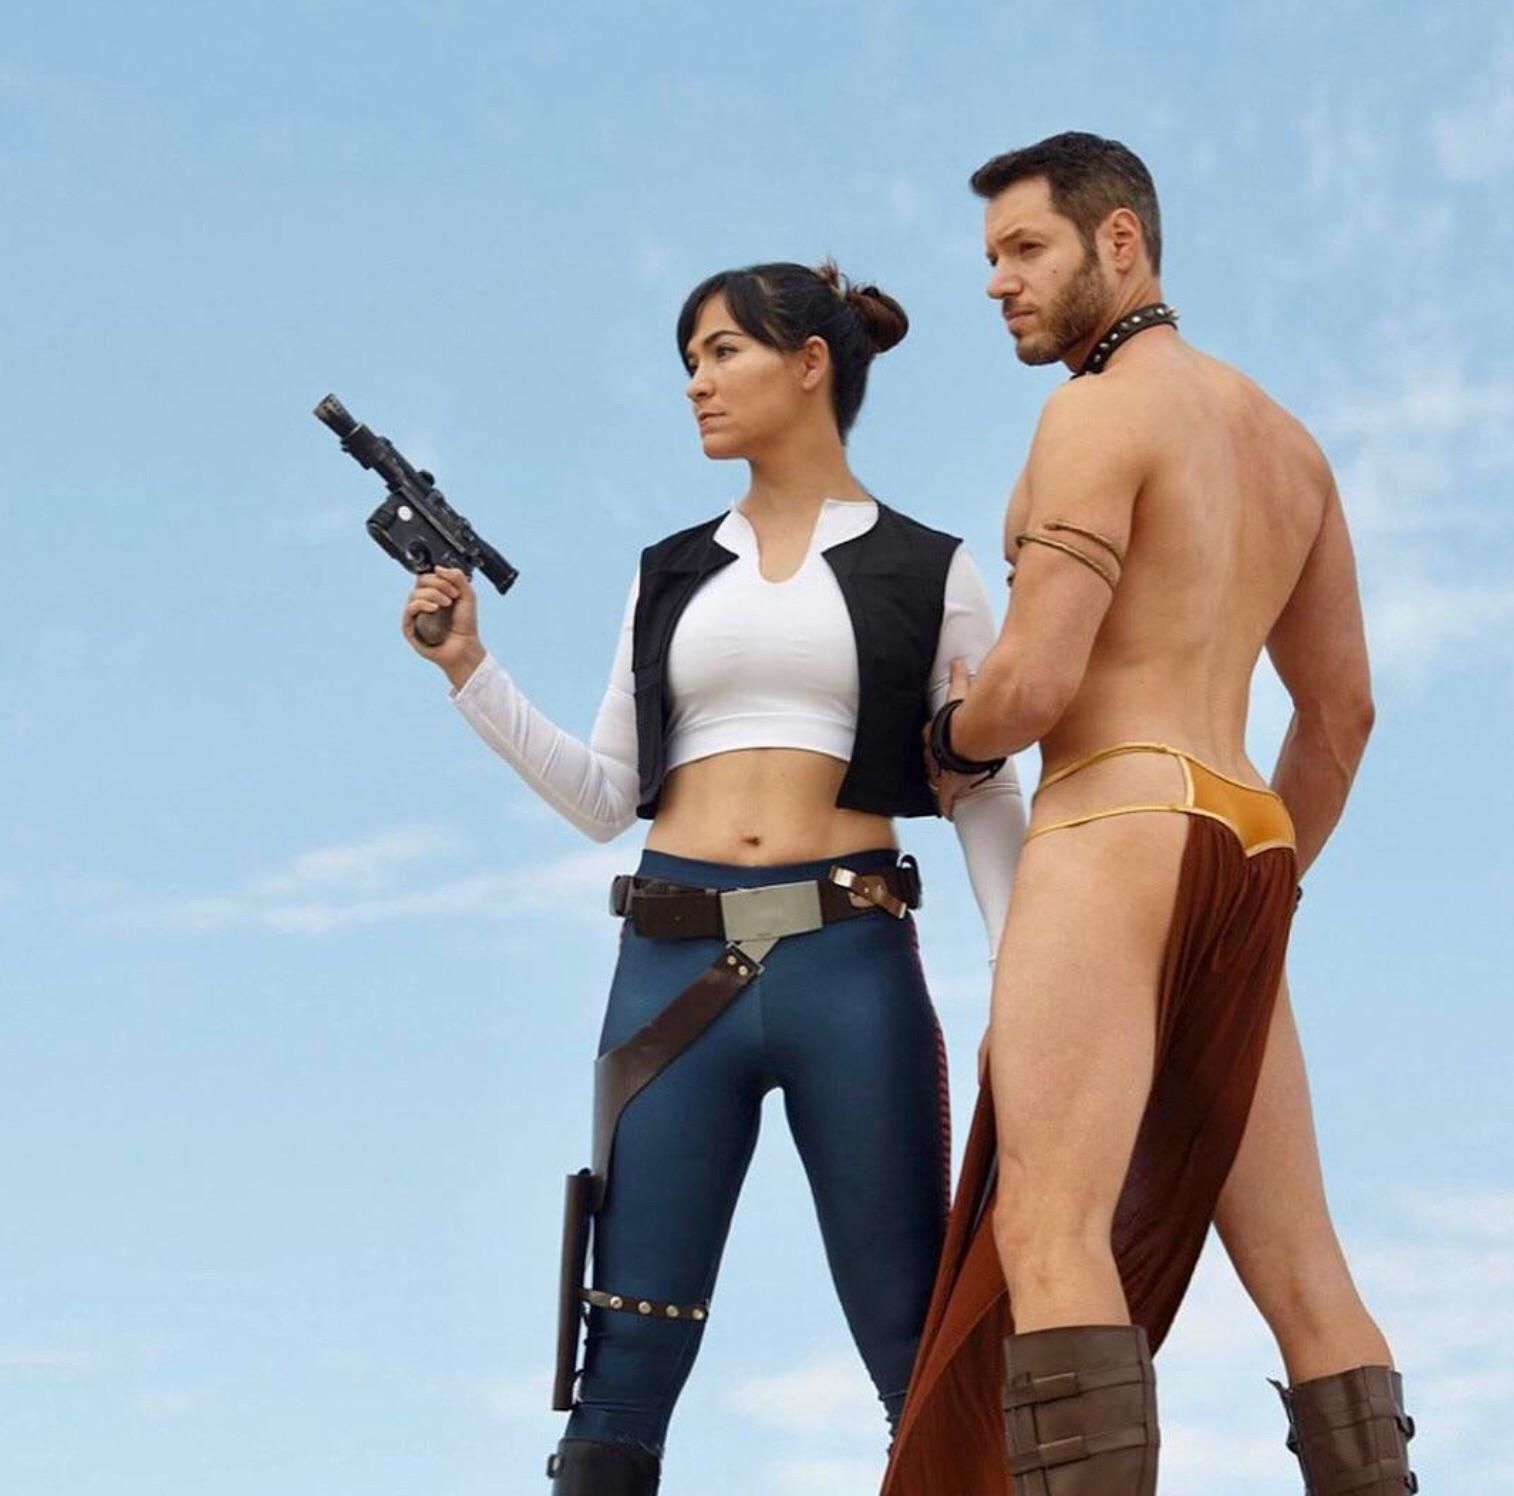 This perfect cosplay of Princess Leia and Han Solo